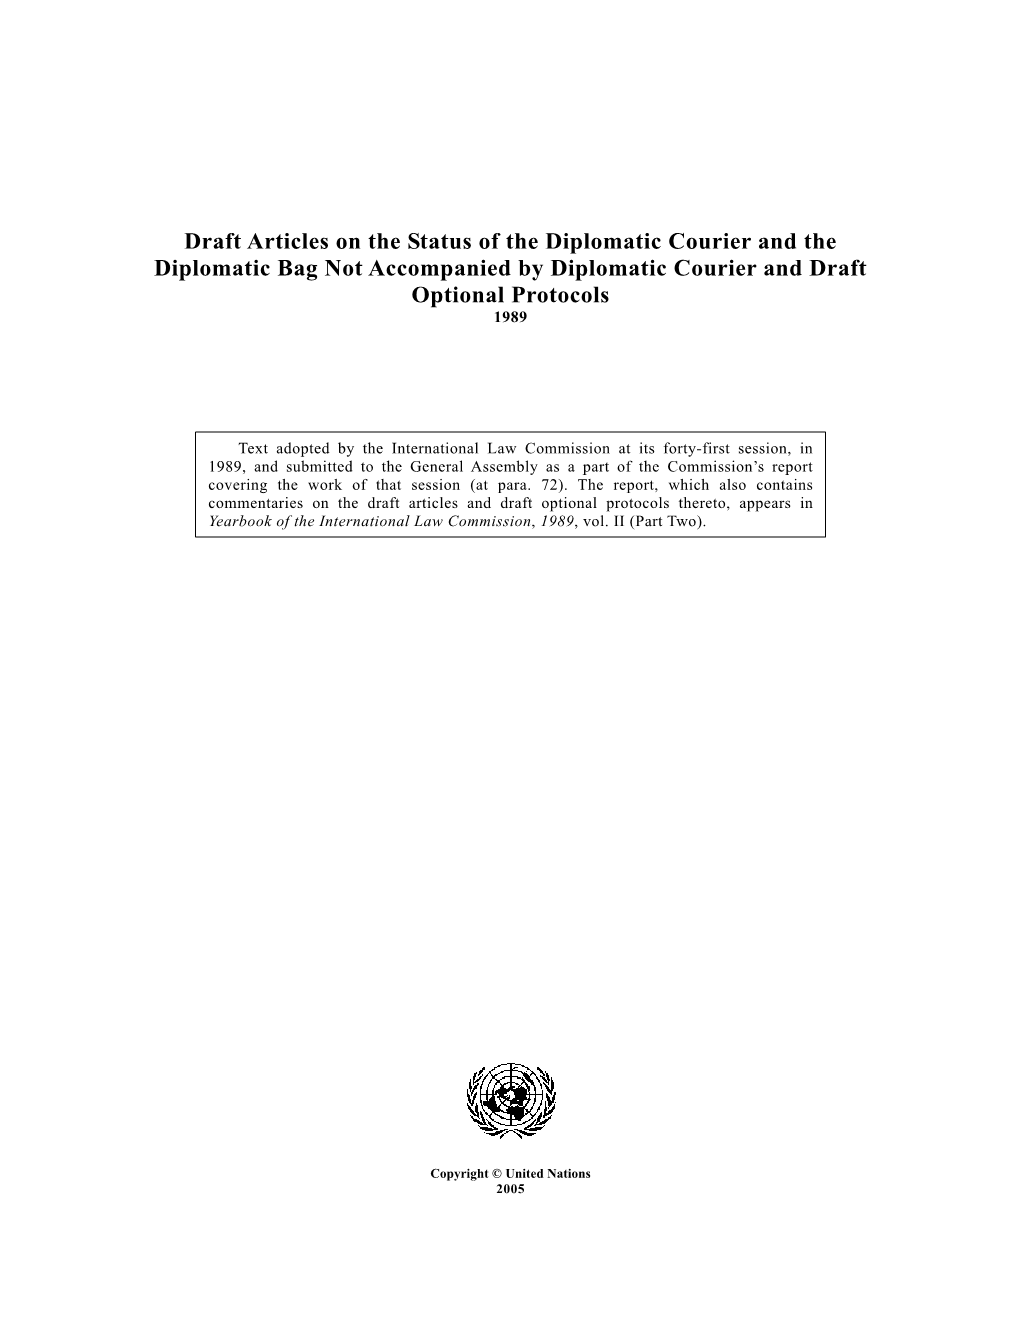 Draft Articles on the Status of the Diplomatic Courier and the Diplomatic Bag Not Accompanied by Diplomatic Courier and Draft Optional Protocols 1989